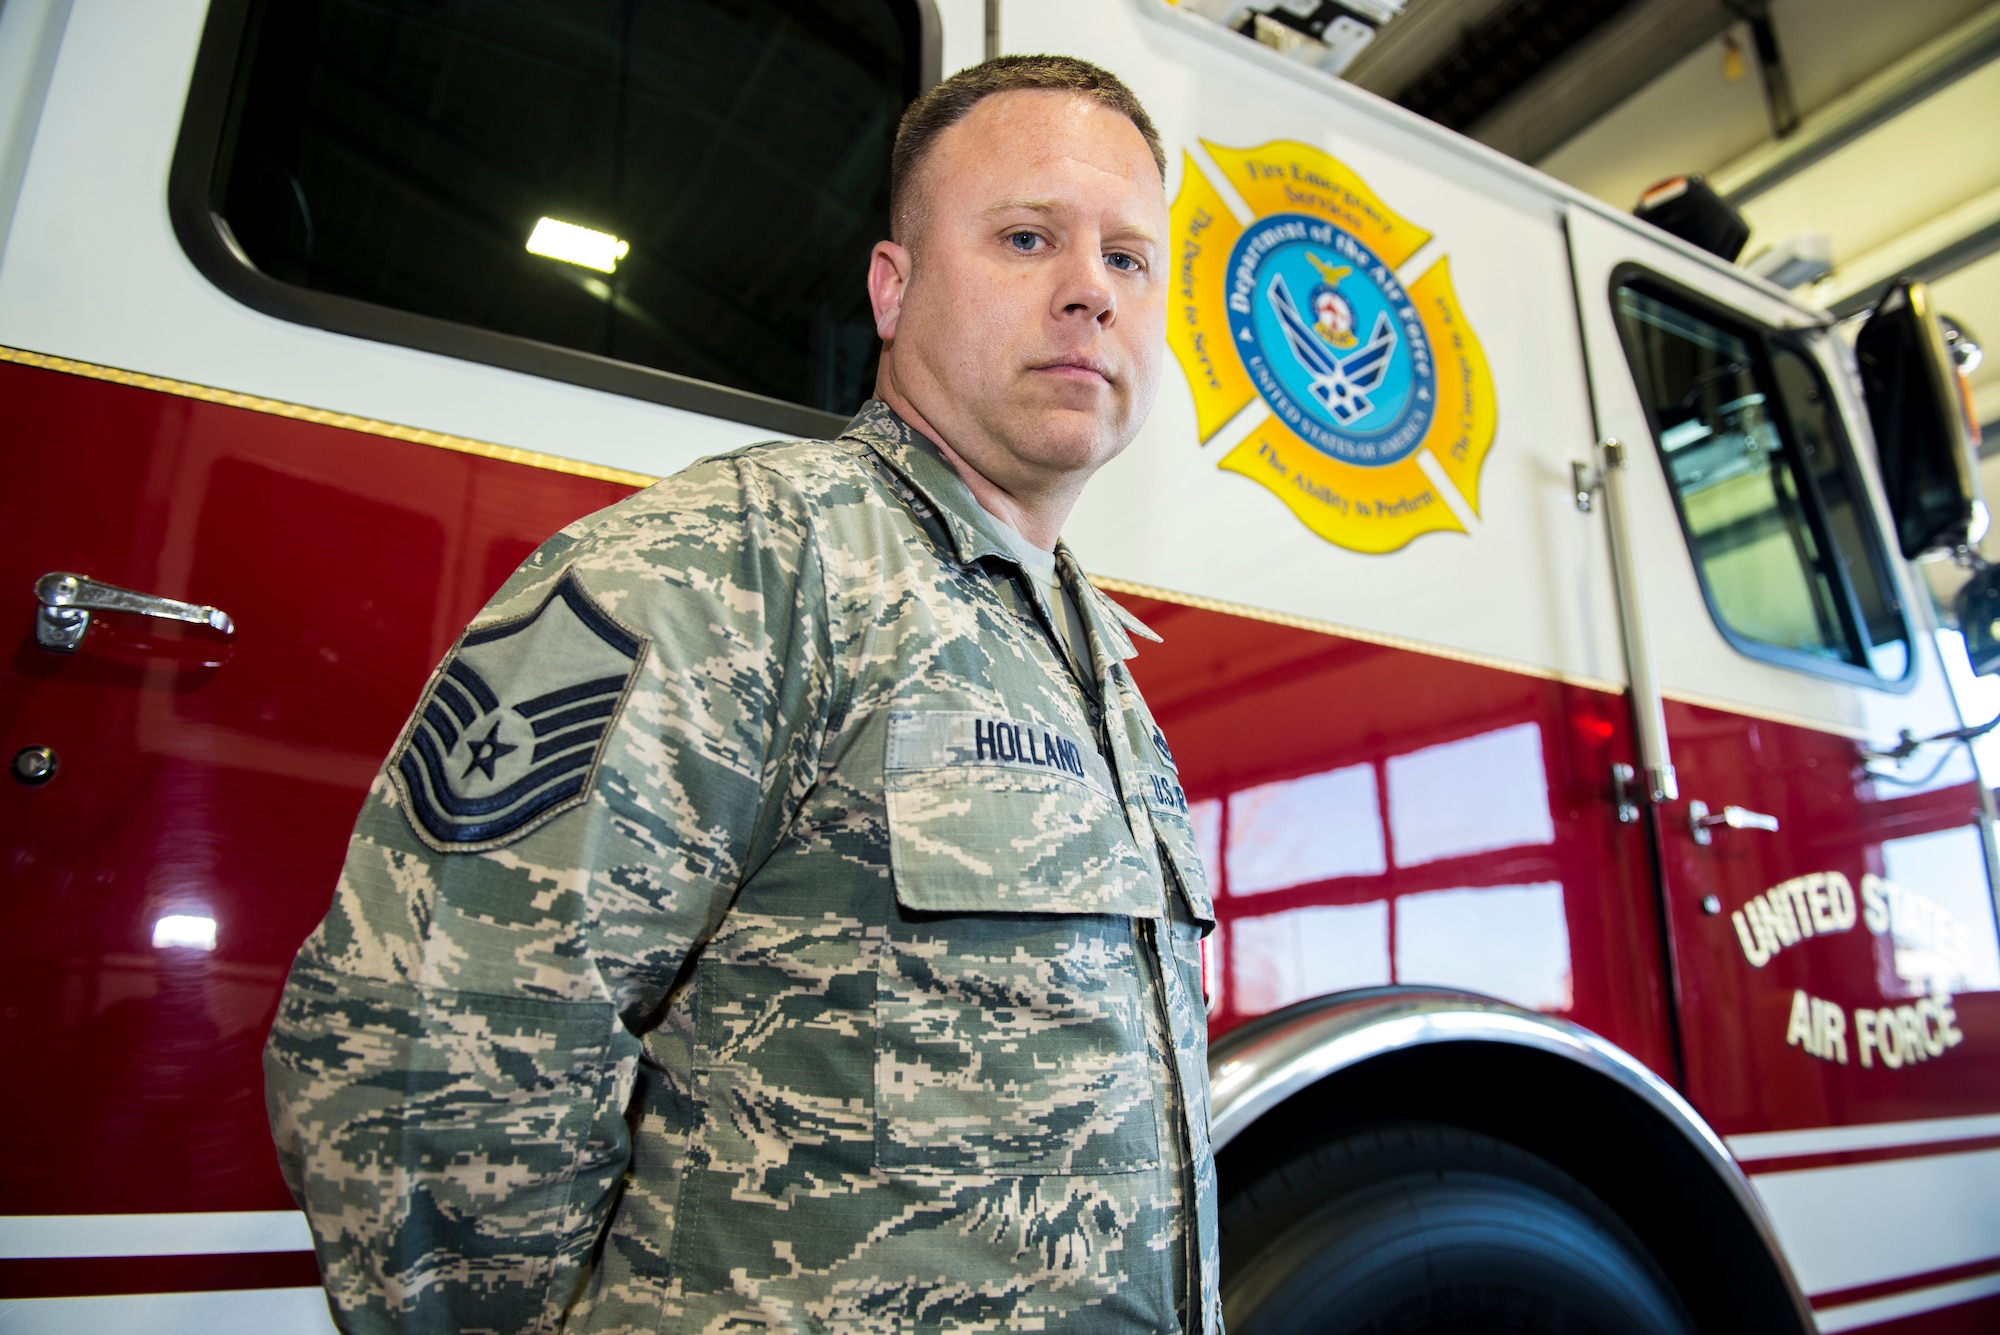 U.S. Air Force Master Sgt. Blaine Holland, 92nd Civil Engineer Squadron Fire Emergency Services superintendent, poses for a photo at Fairchild Air Force Base, Washington, March 19, 2019. Blaine was honored by the Spokane Fire Department for his actions in helping save the life of a car accident victim. (U.S. Air Force photo by Airman 1st Class Lawrence Sena)